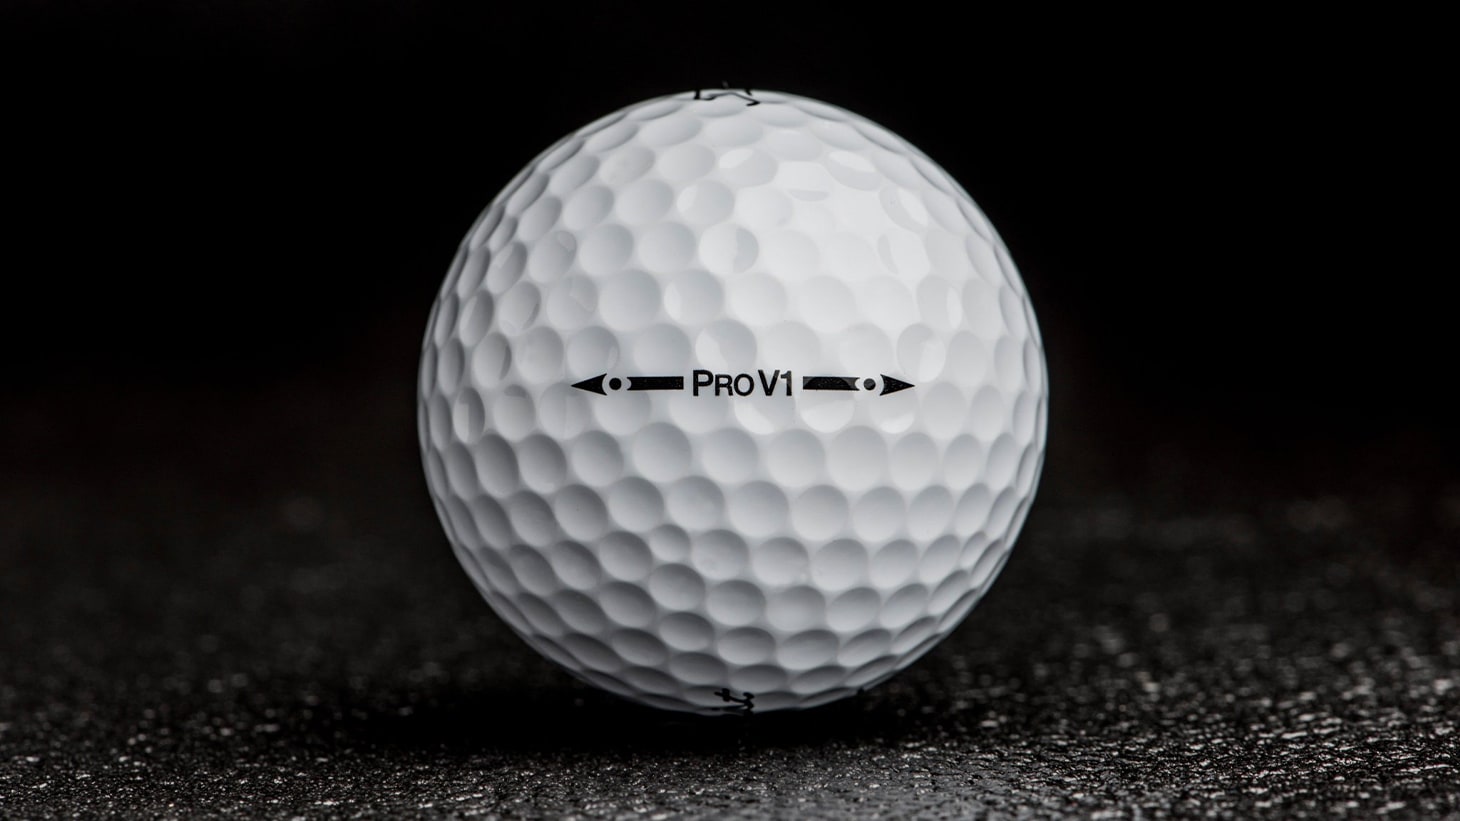 Pro V1 and Pro V1x Sidestamps Throughout the Years How to Tell Which